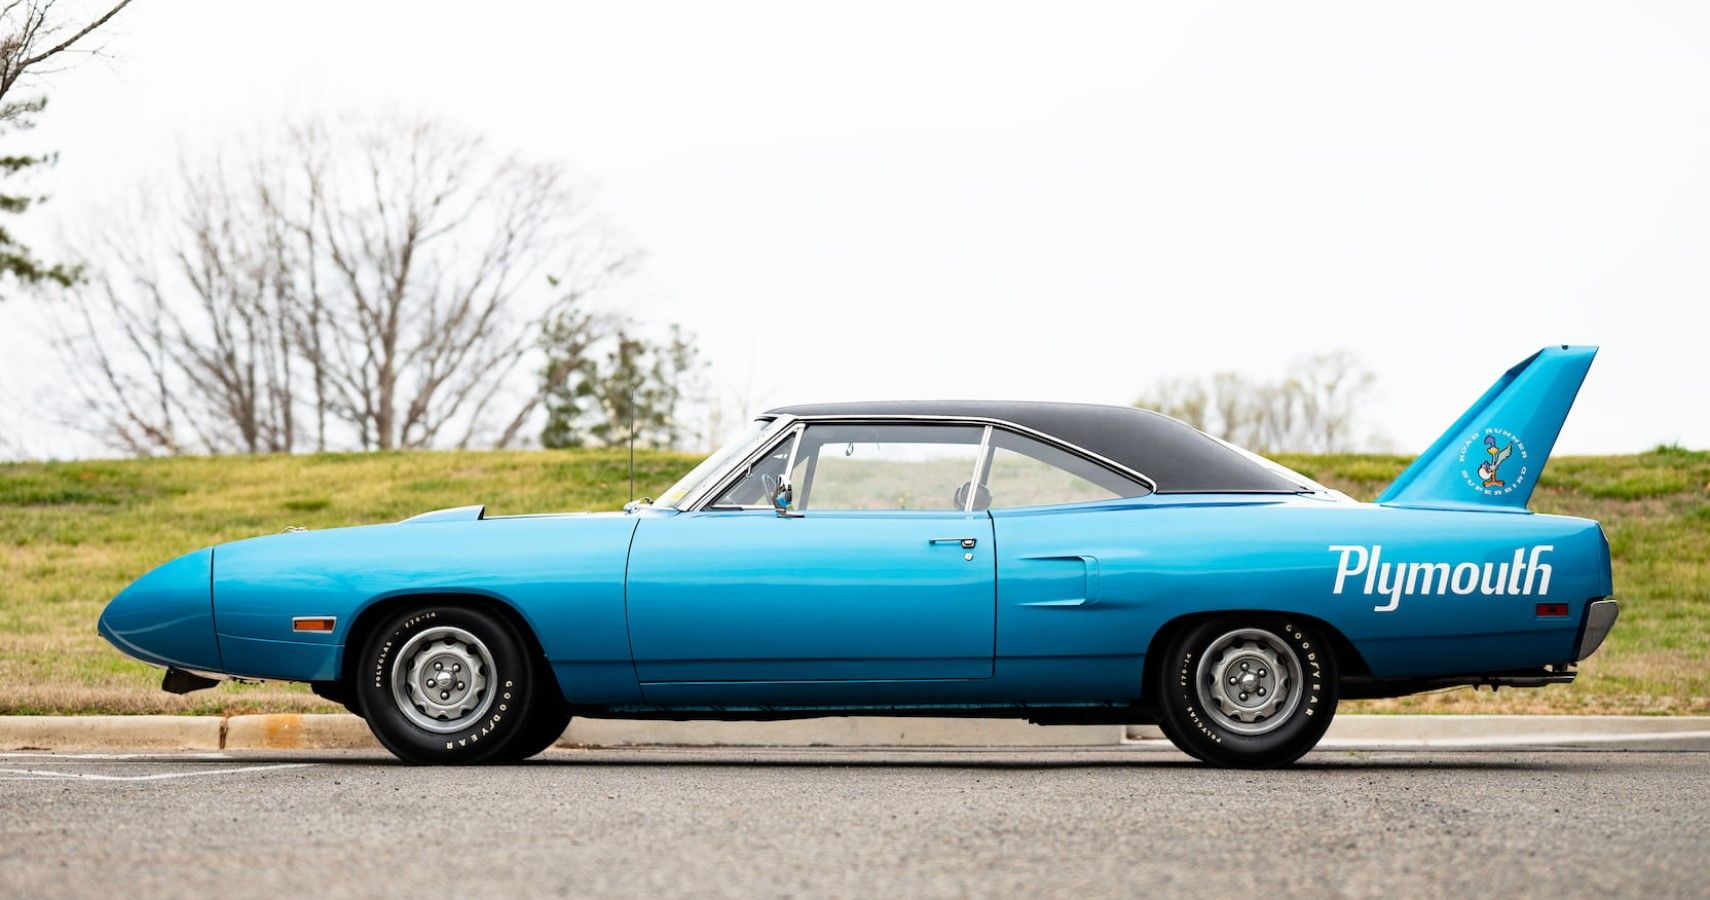 1970 Plymouth Road Runner Superbird side view in blue